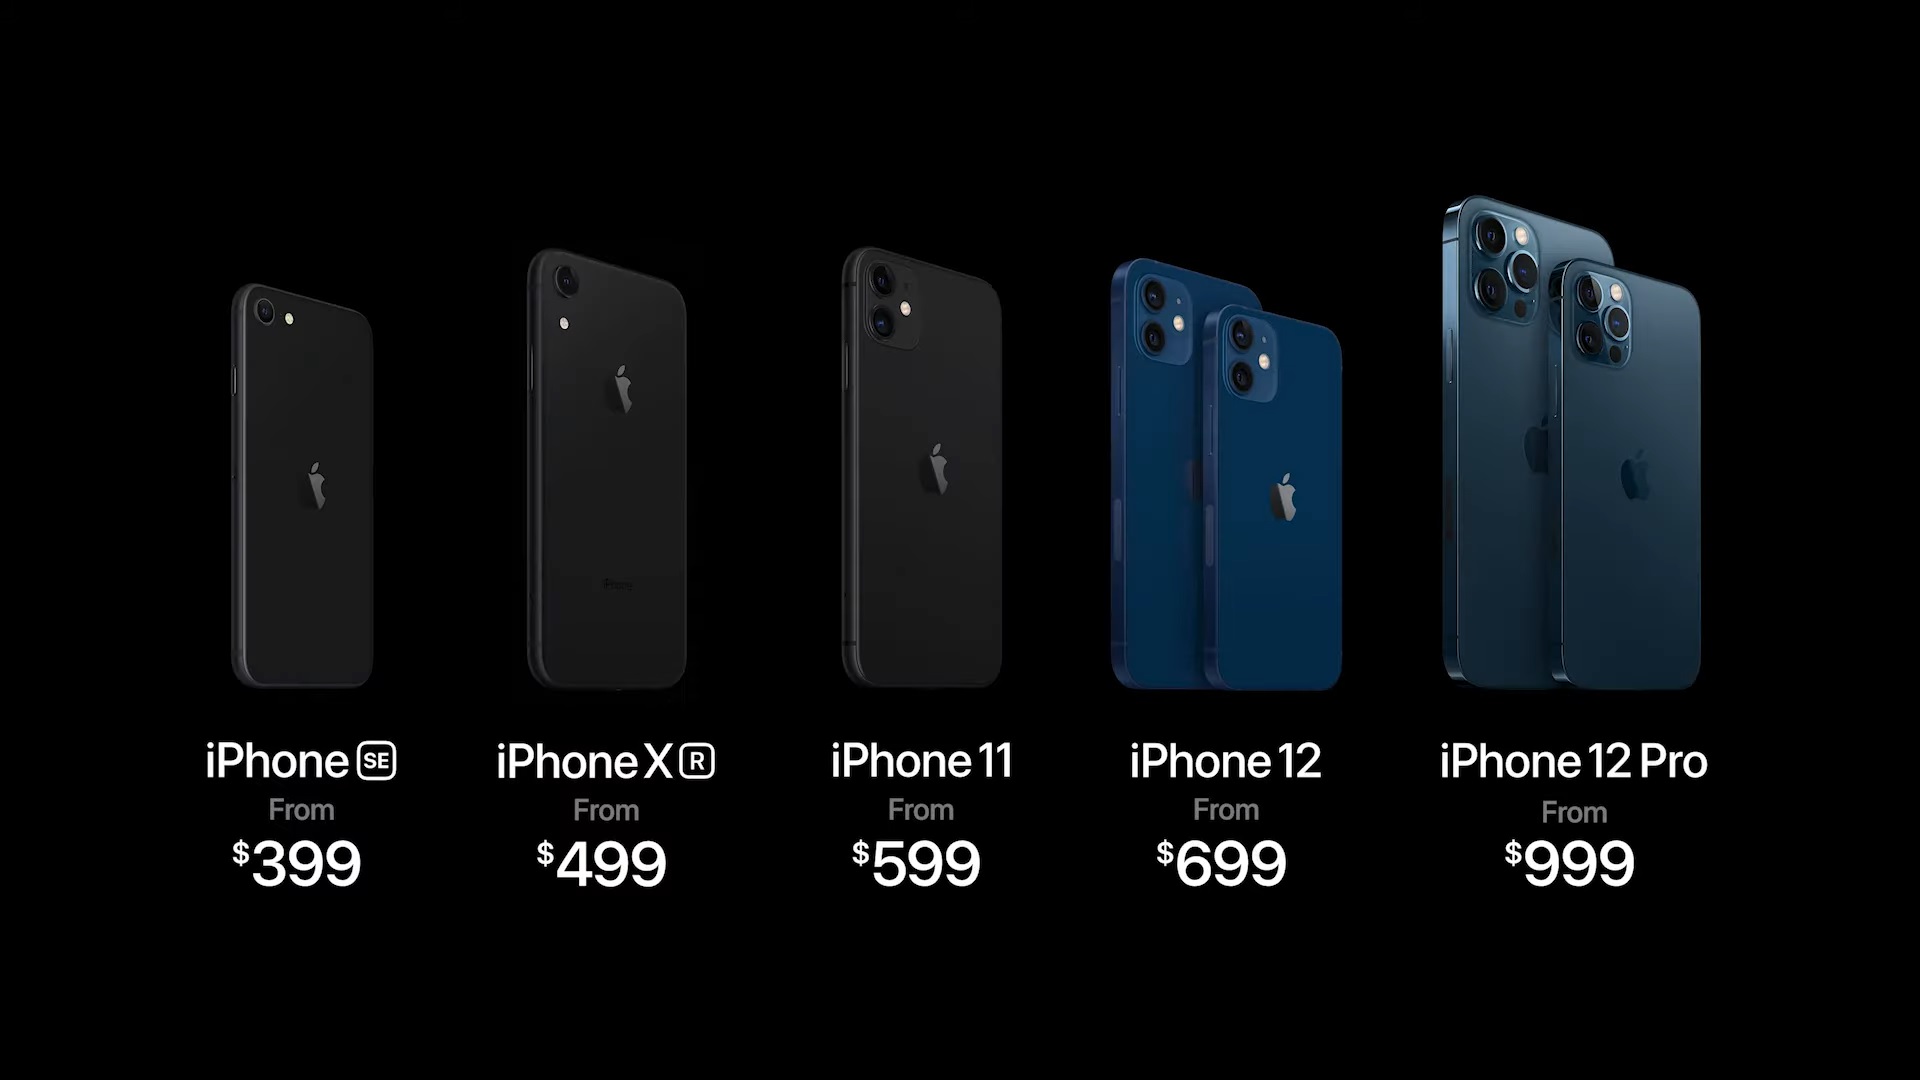 Apple Iphone 12 Launch Event Highlights Iphone 12 Iphone 12 Mini Iphone 12 Pro Iphone 12 Pro Max Launched Along With Homepod Mini And Magsafe Charger Price Starts At Rs 69 900